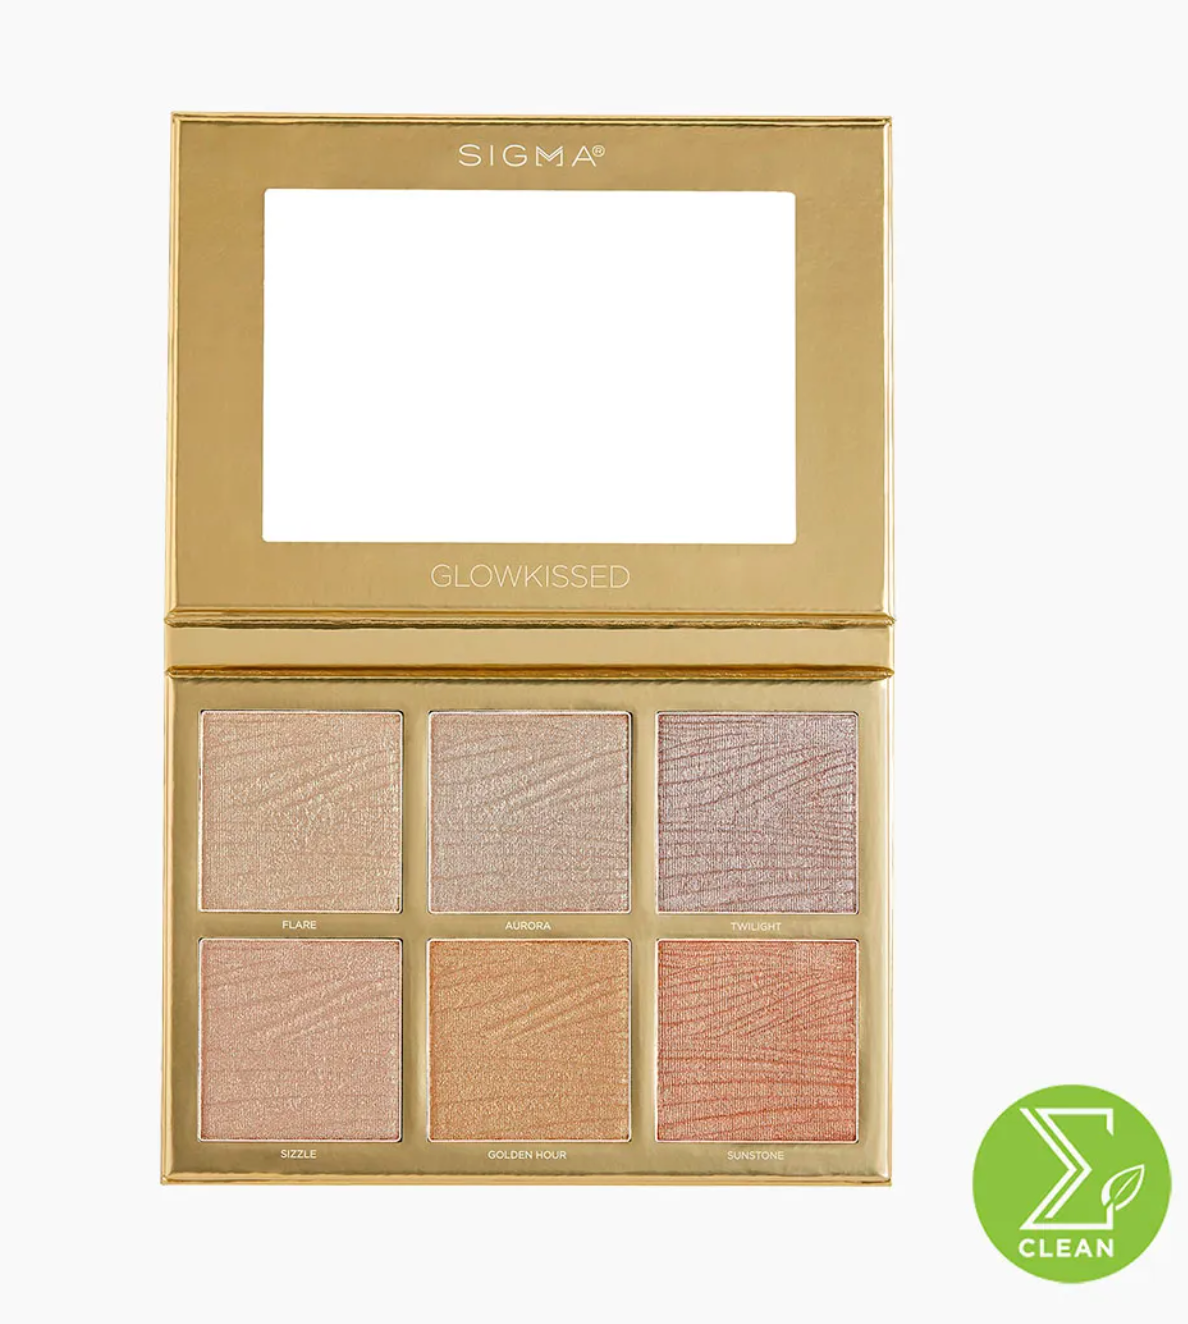 Sigma Beauty Glowkissed Highlight Palette